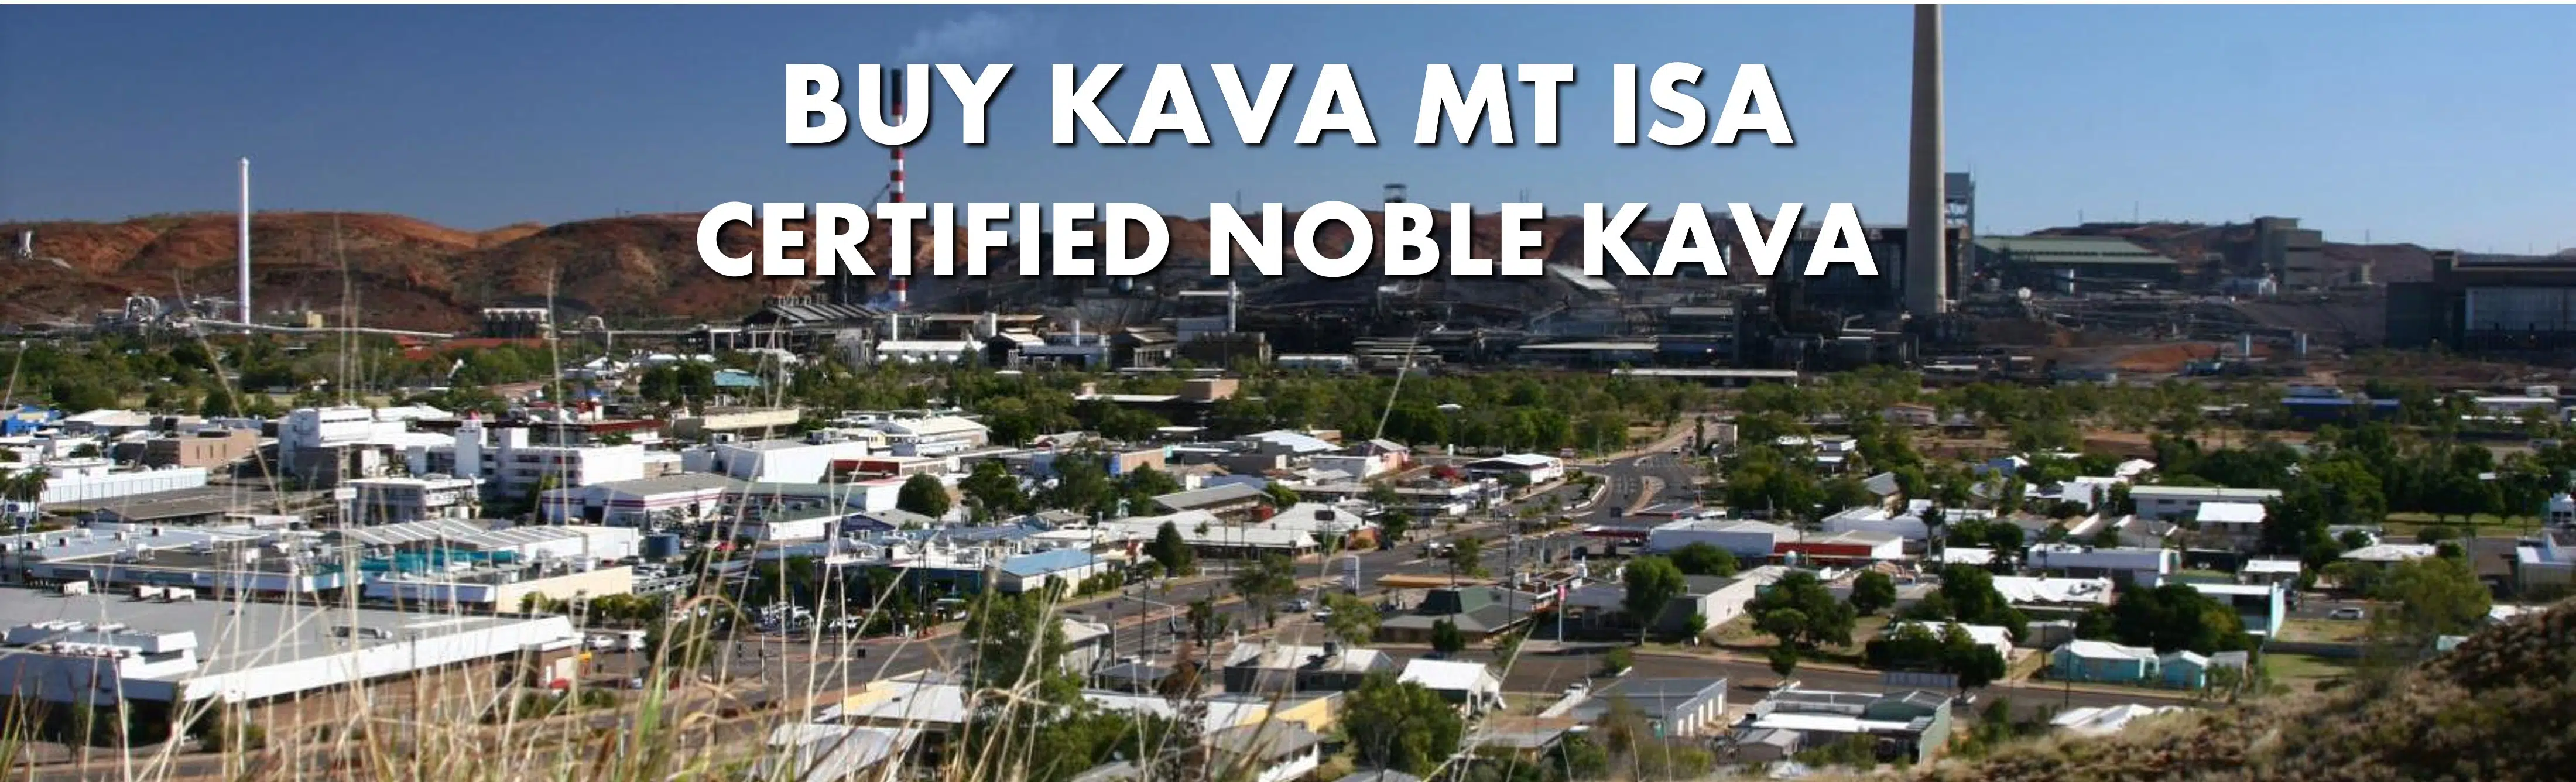 Aerial view of Mt Isa Queensland with caption Buy Kava Mt Isa Certified Noble Kava